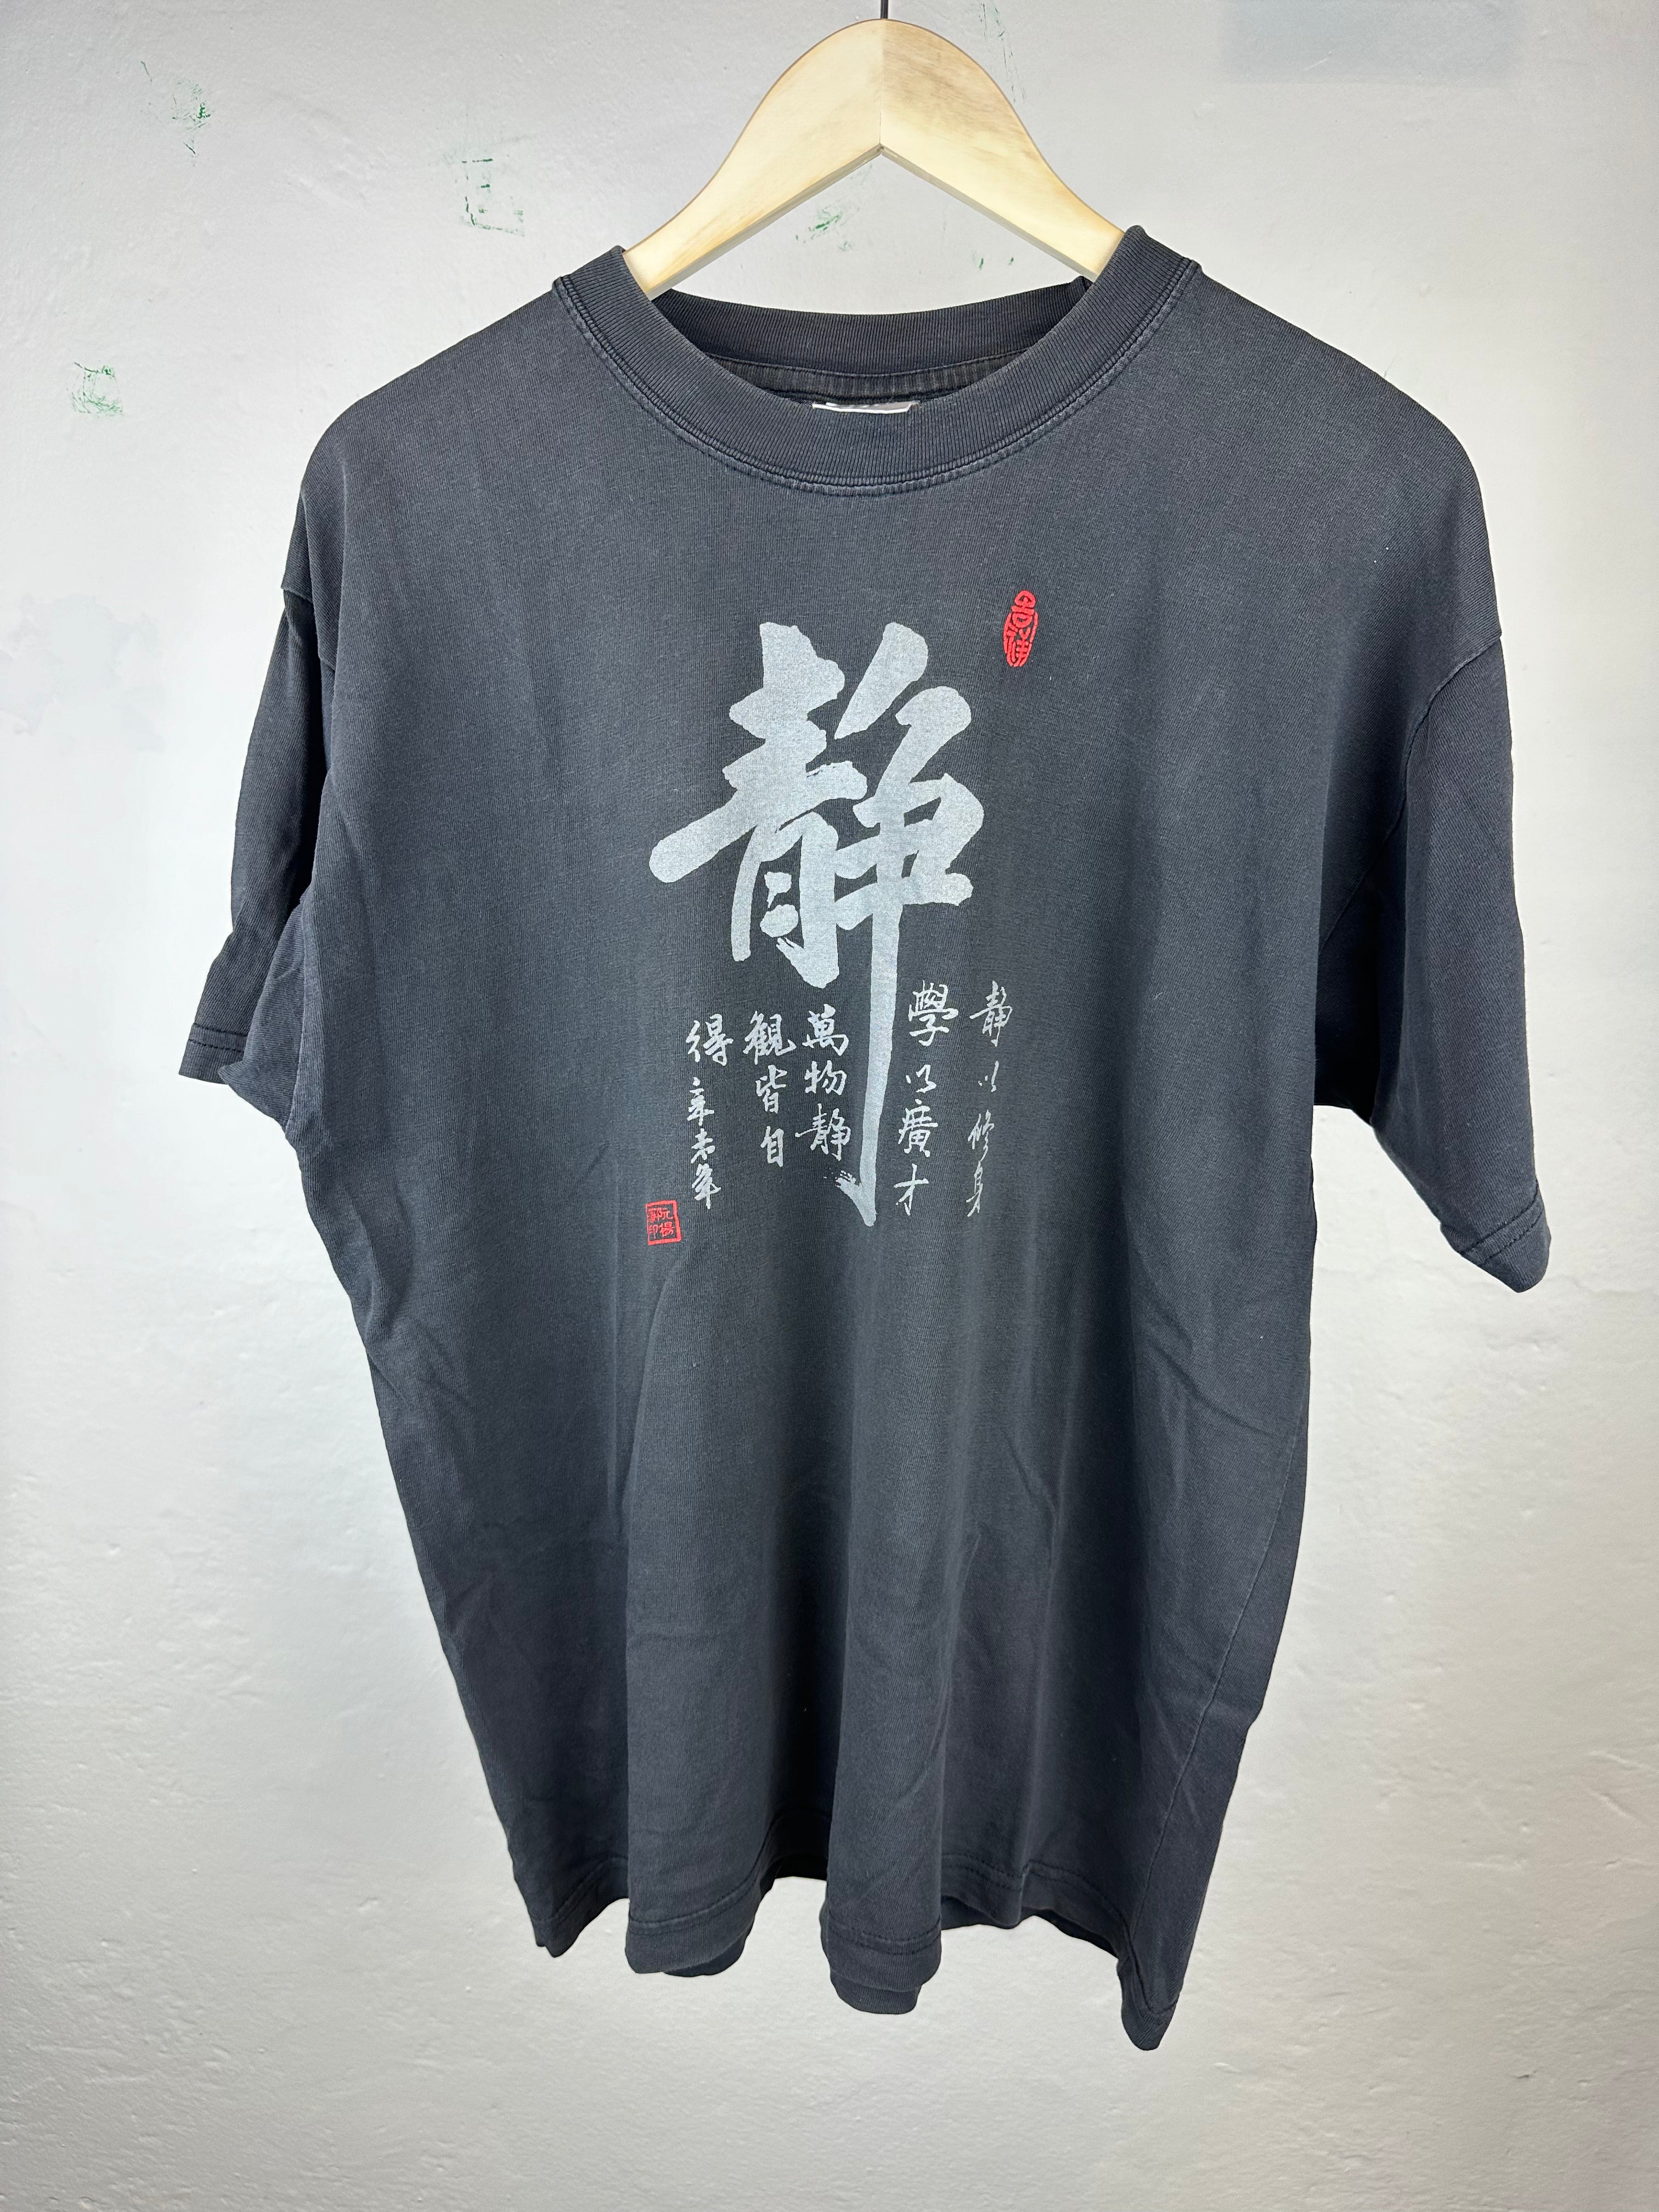 Vintage Chinese Symbol "Quiet" Faded T-shirt - size L